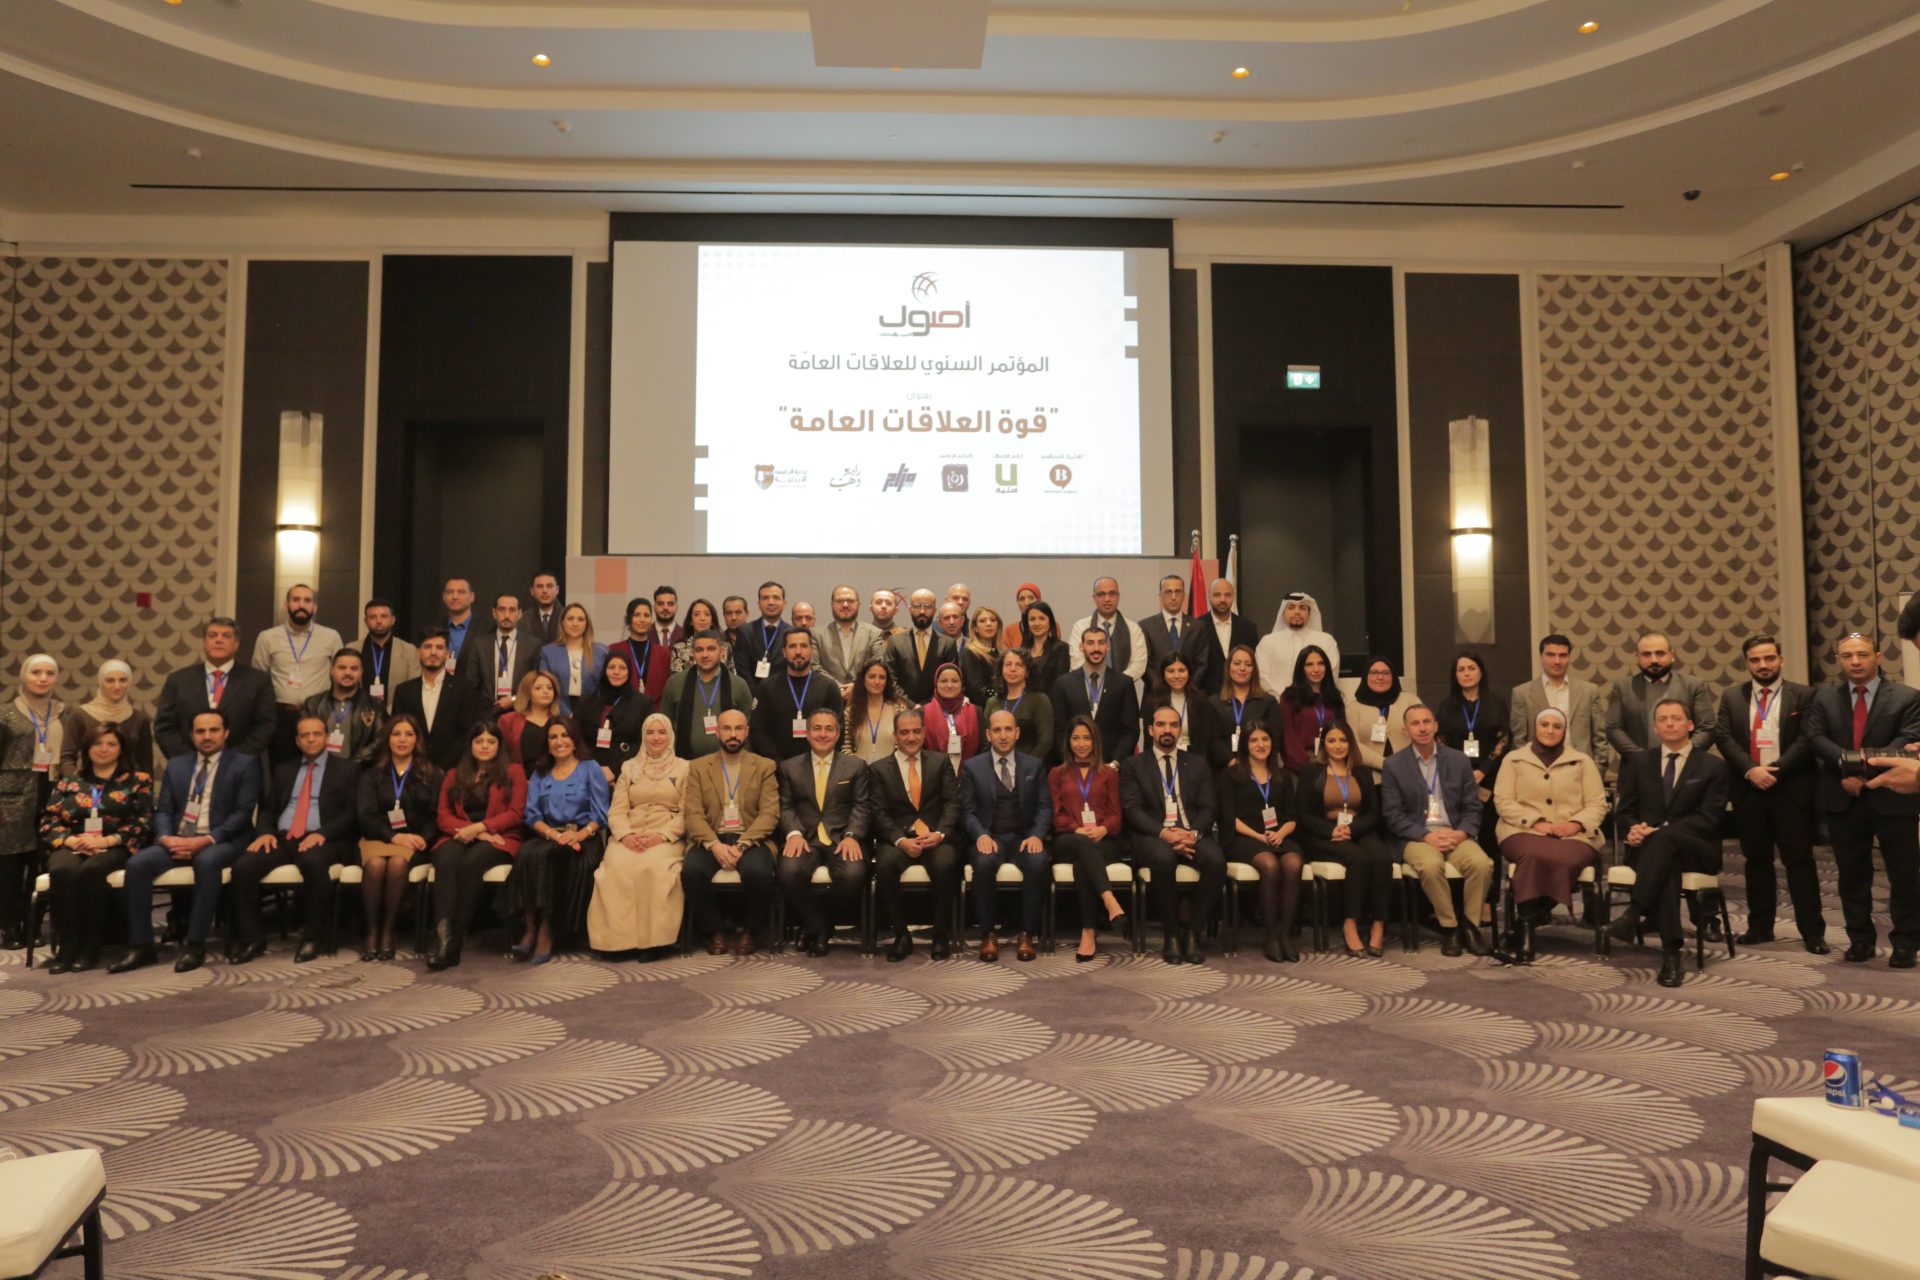 The first annual public relations conference concluded in Jordan amid great success